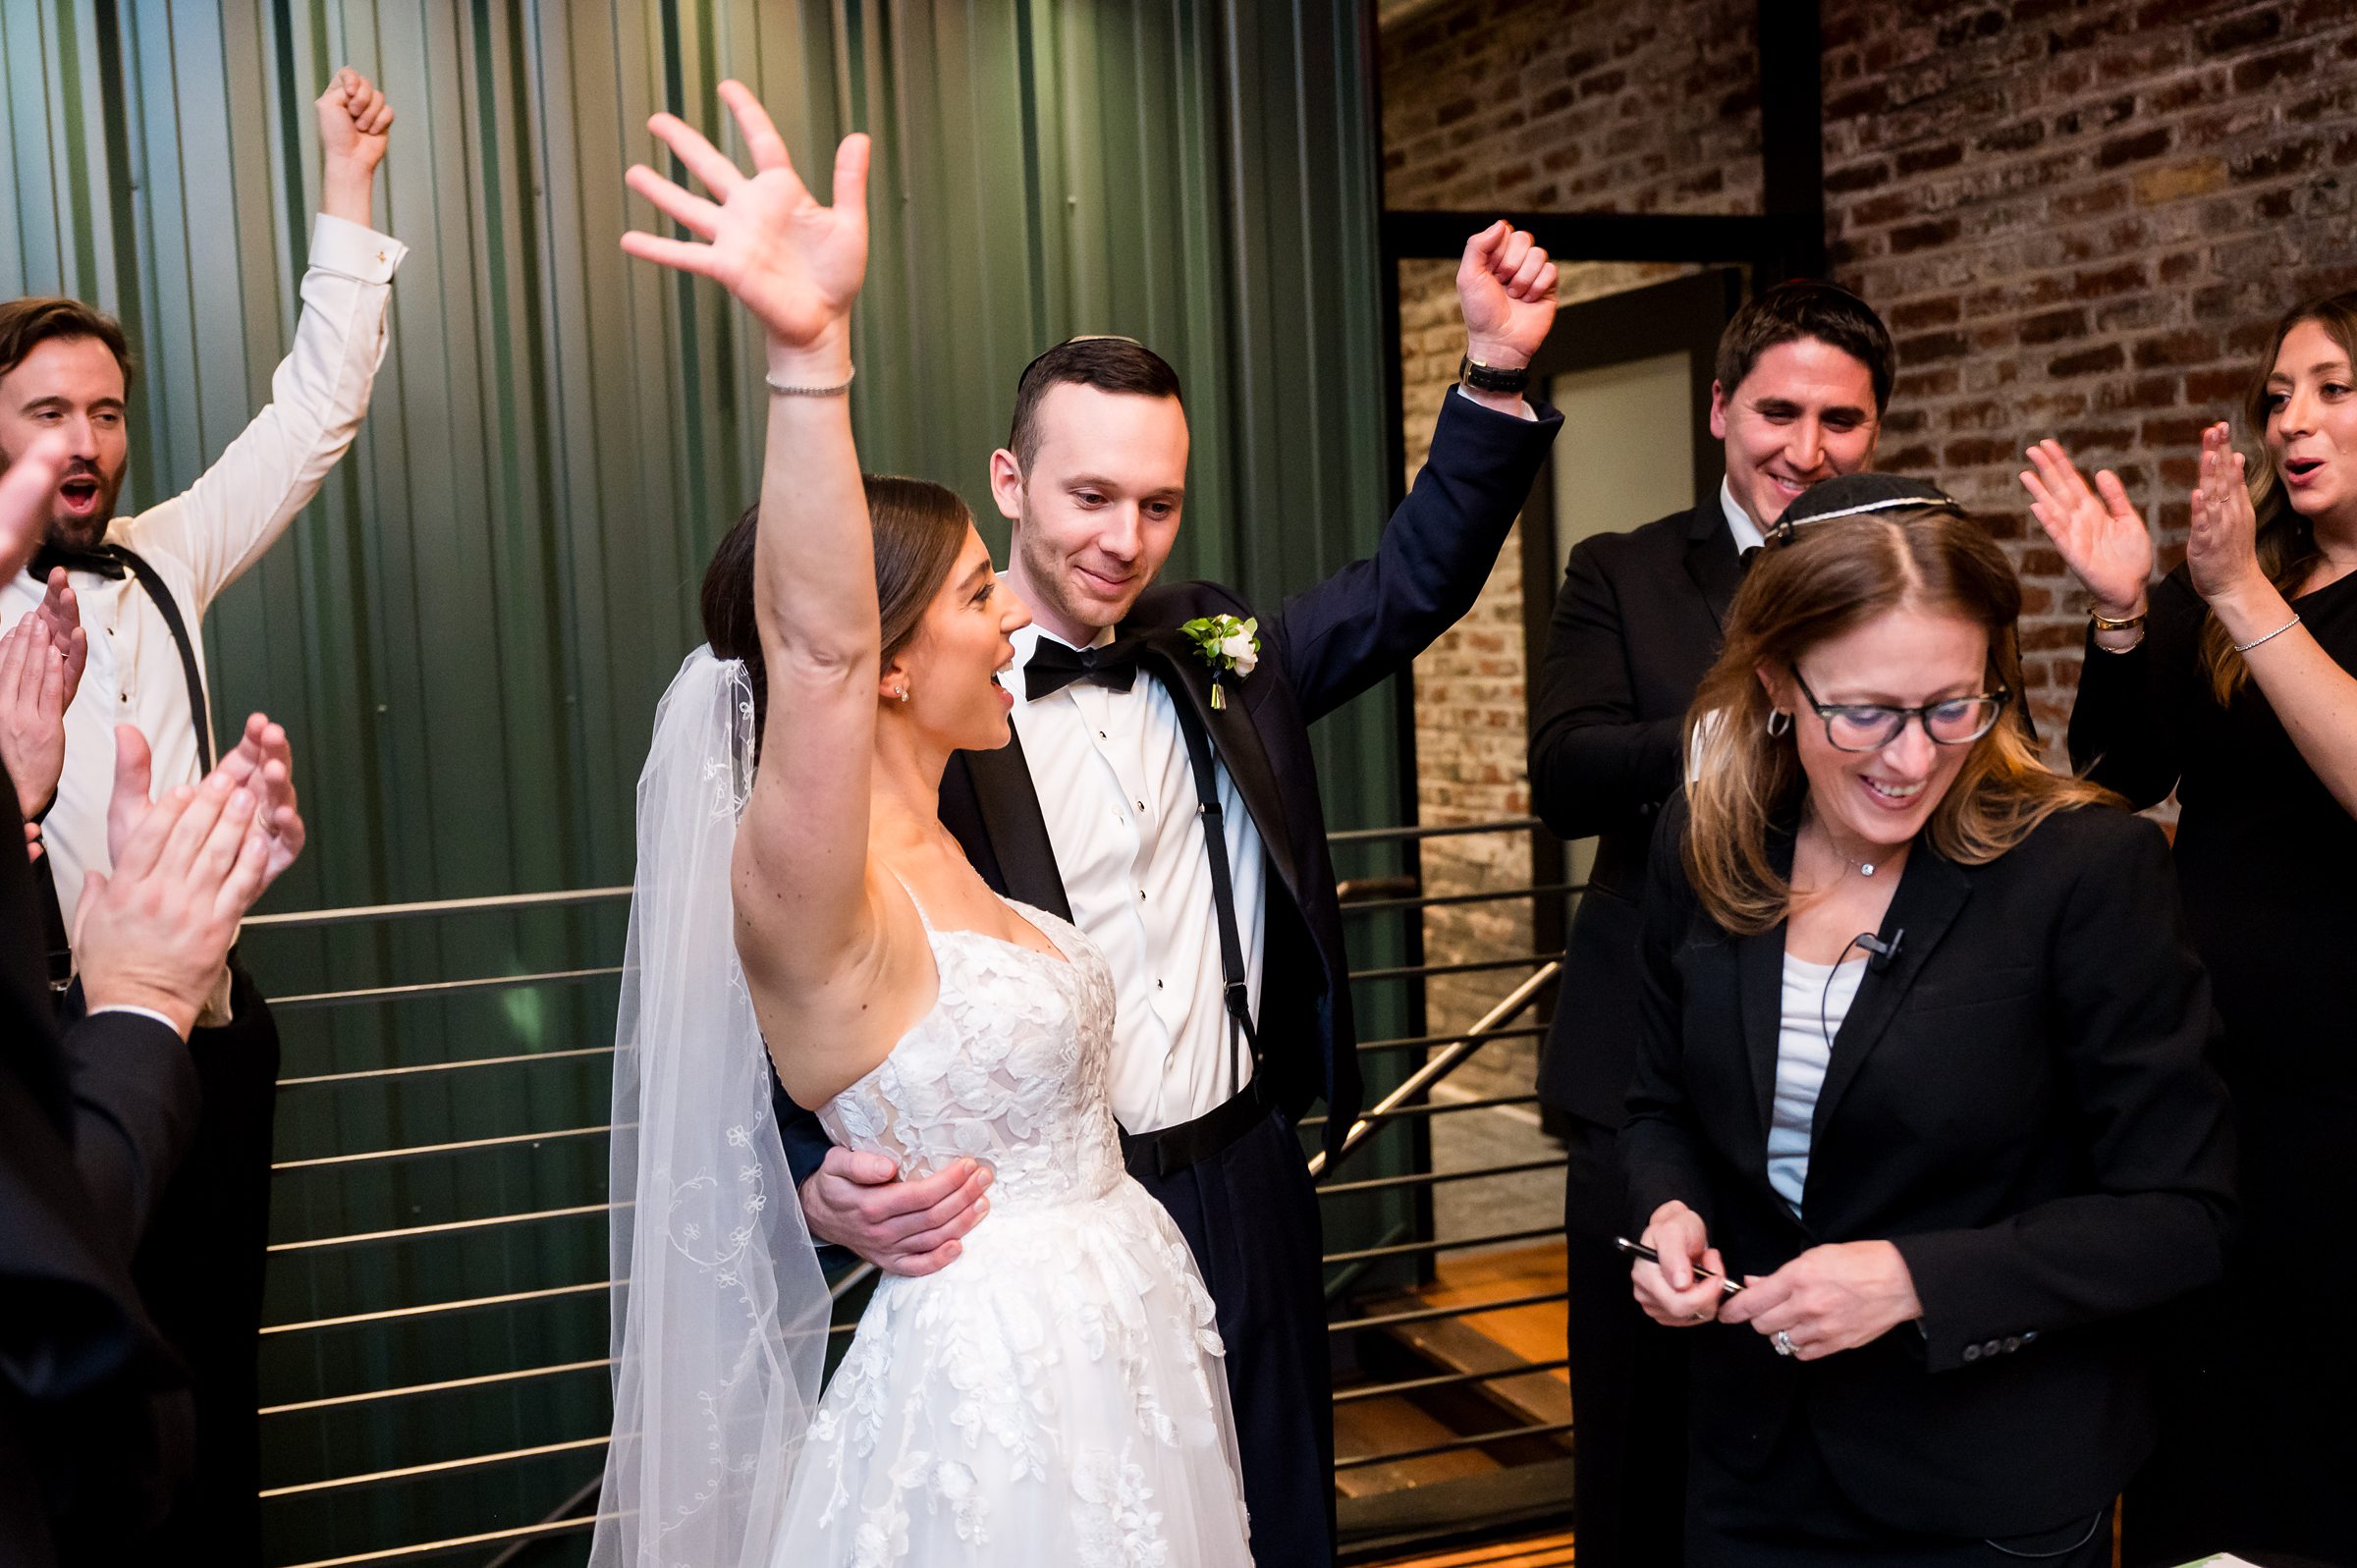 At Lilah Events wedding, the bride and groom joyfully wave their hands in the air at the reception.